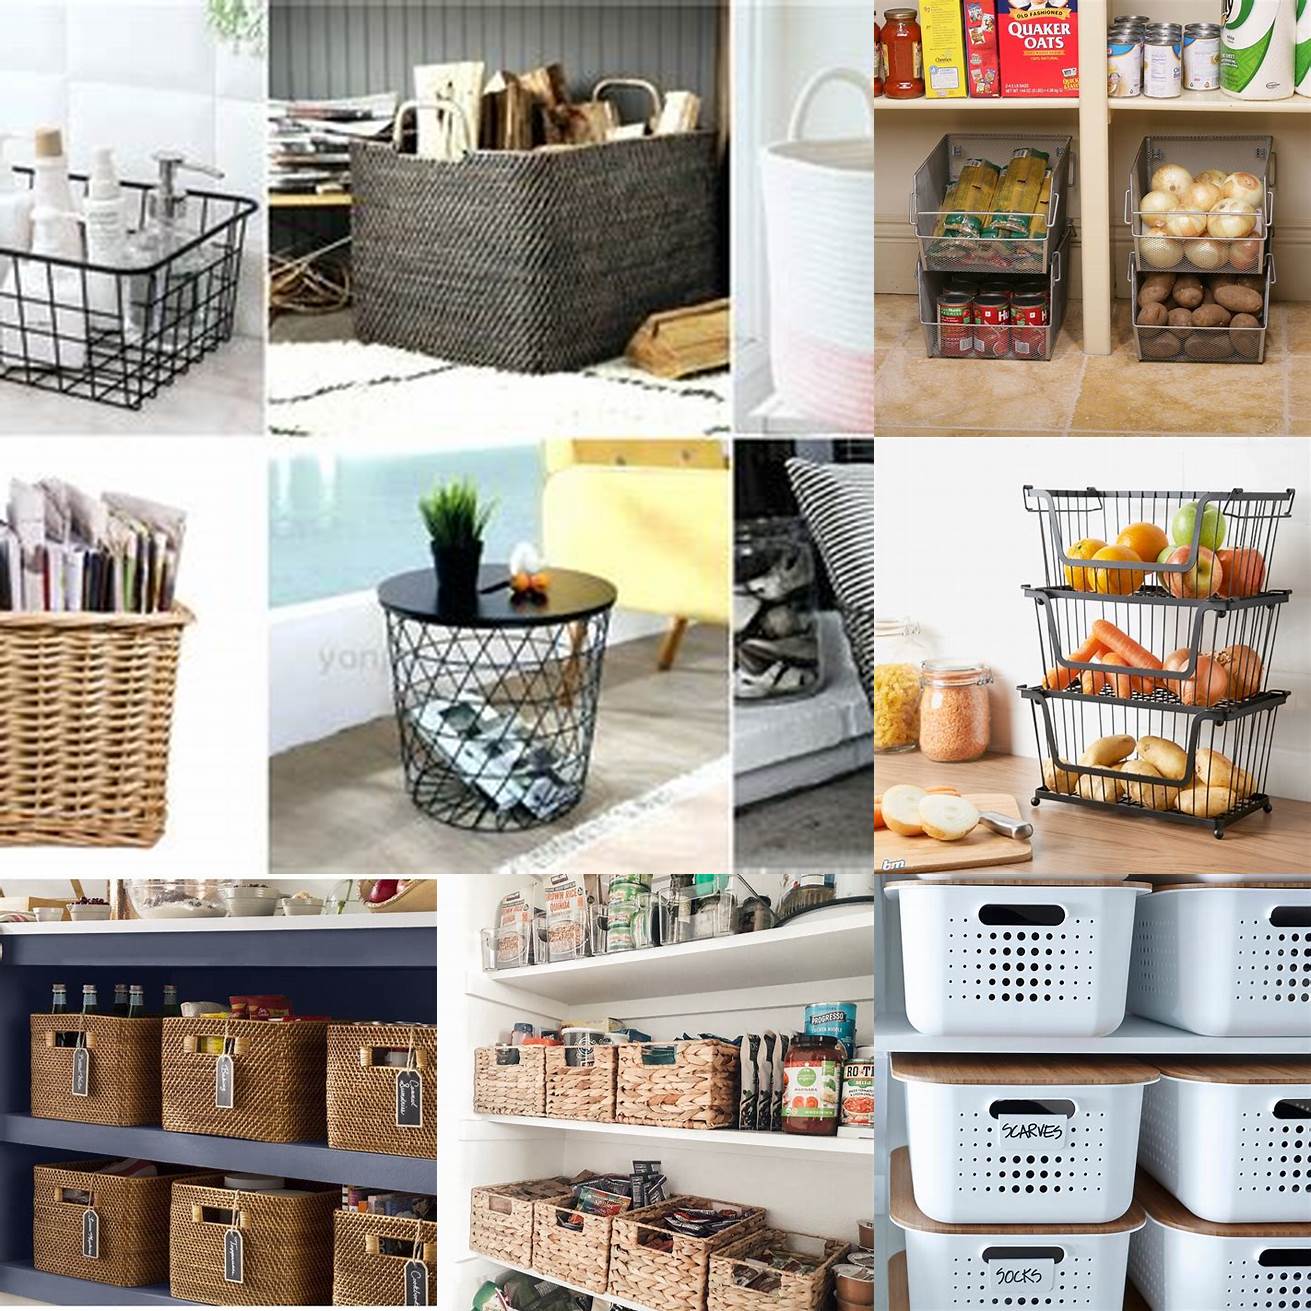 Use baskets and bins to store items